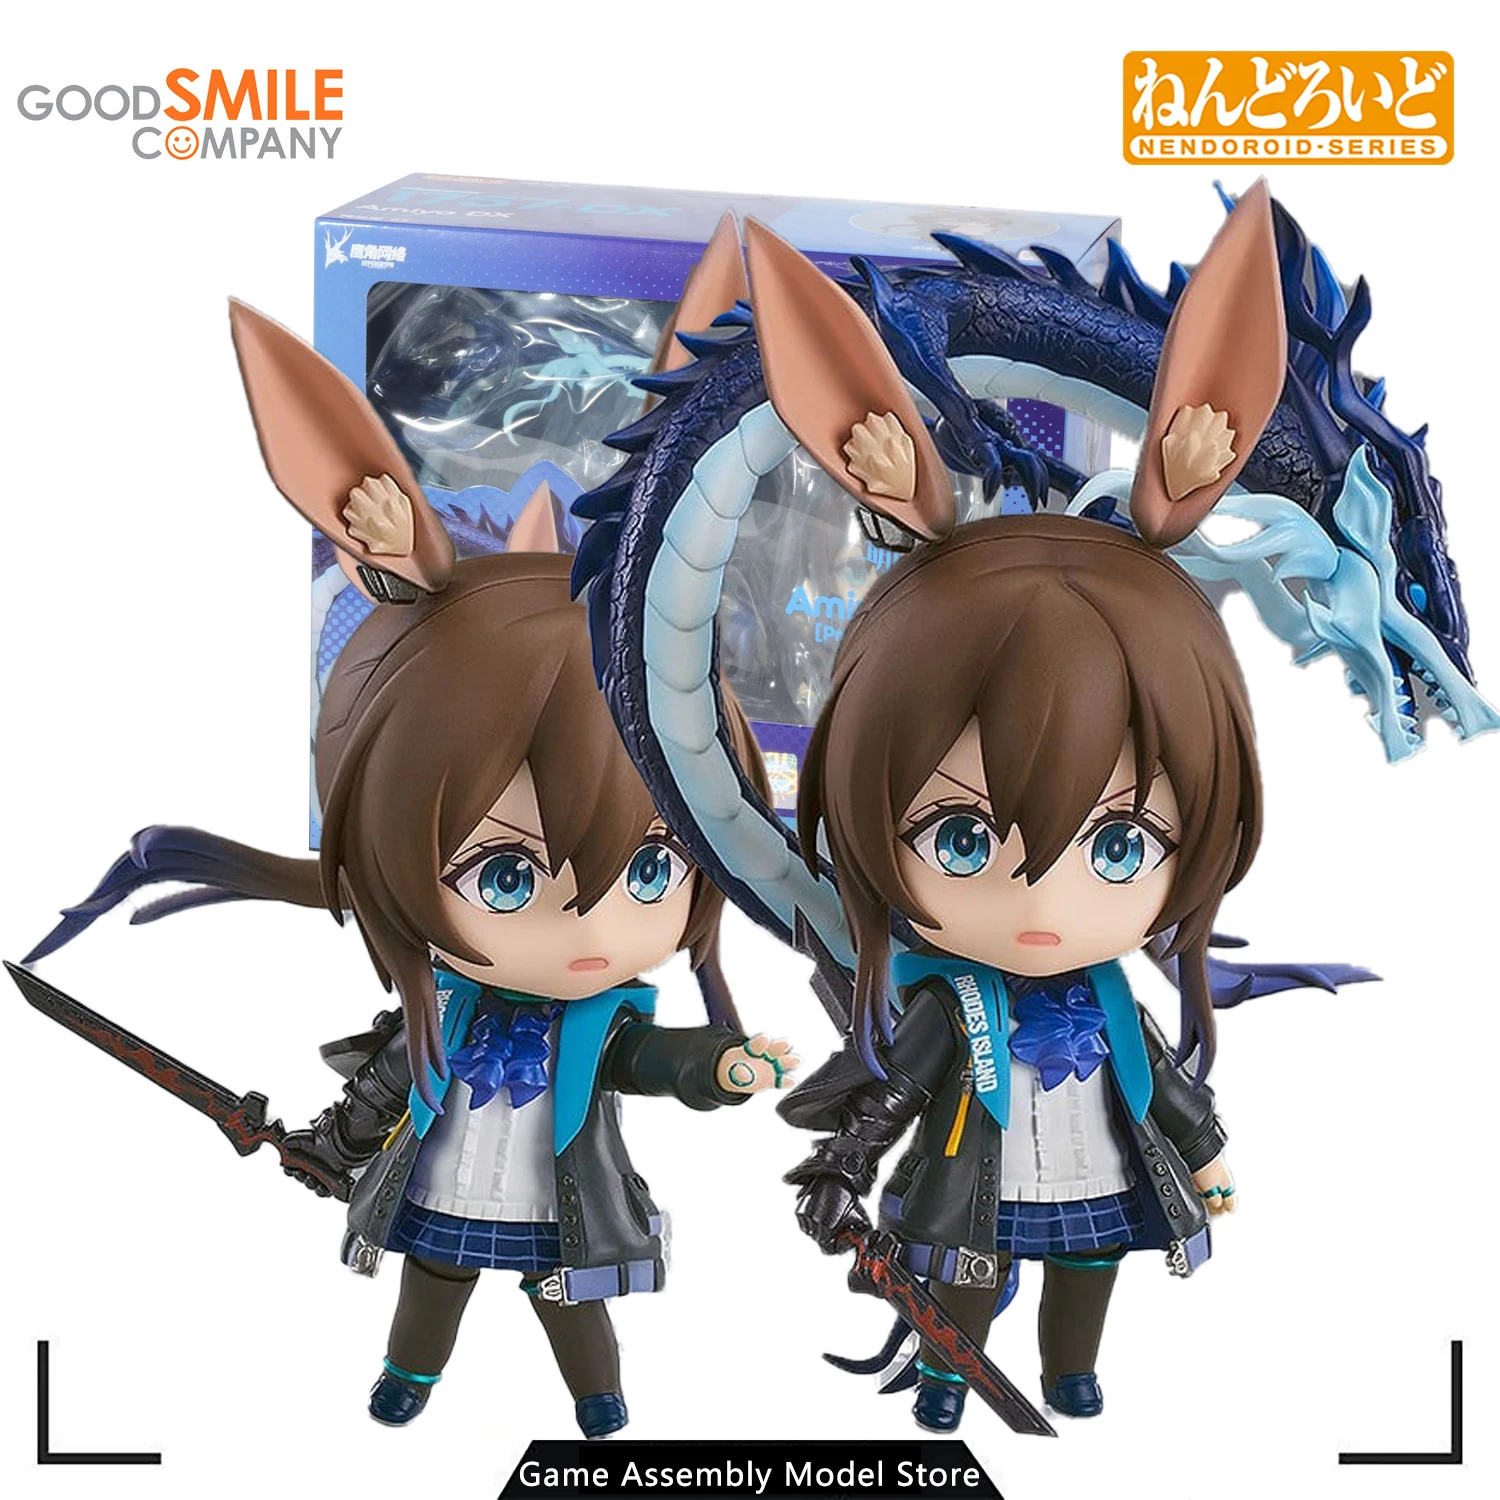 

In Stock 100% Original GSC Nendoroid Arknights Amiya DX Promotion Ver Anime Assembled Action Figure Toy PVC Collectible 100mm